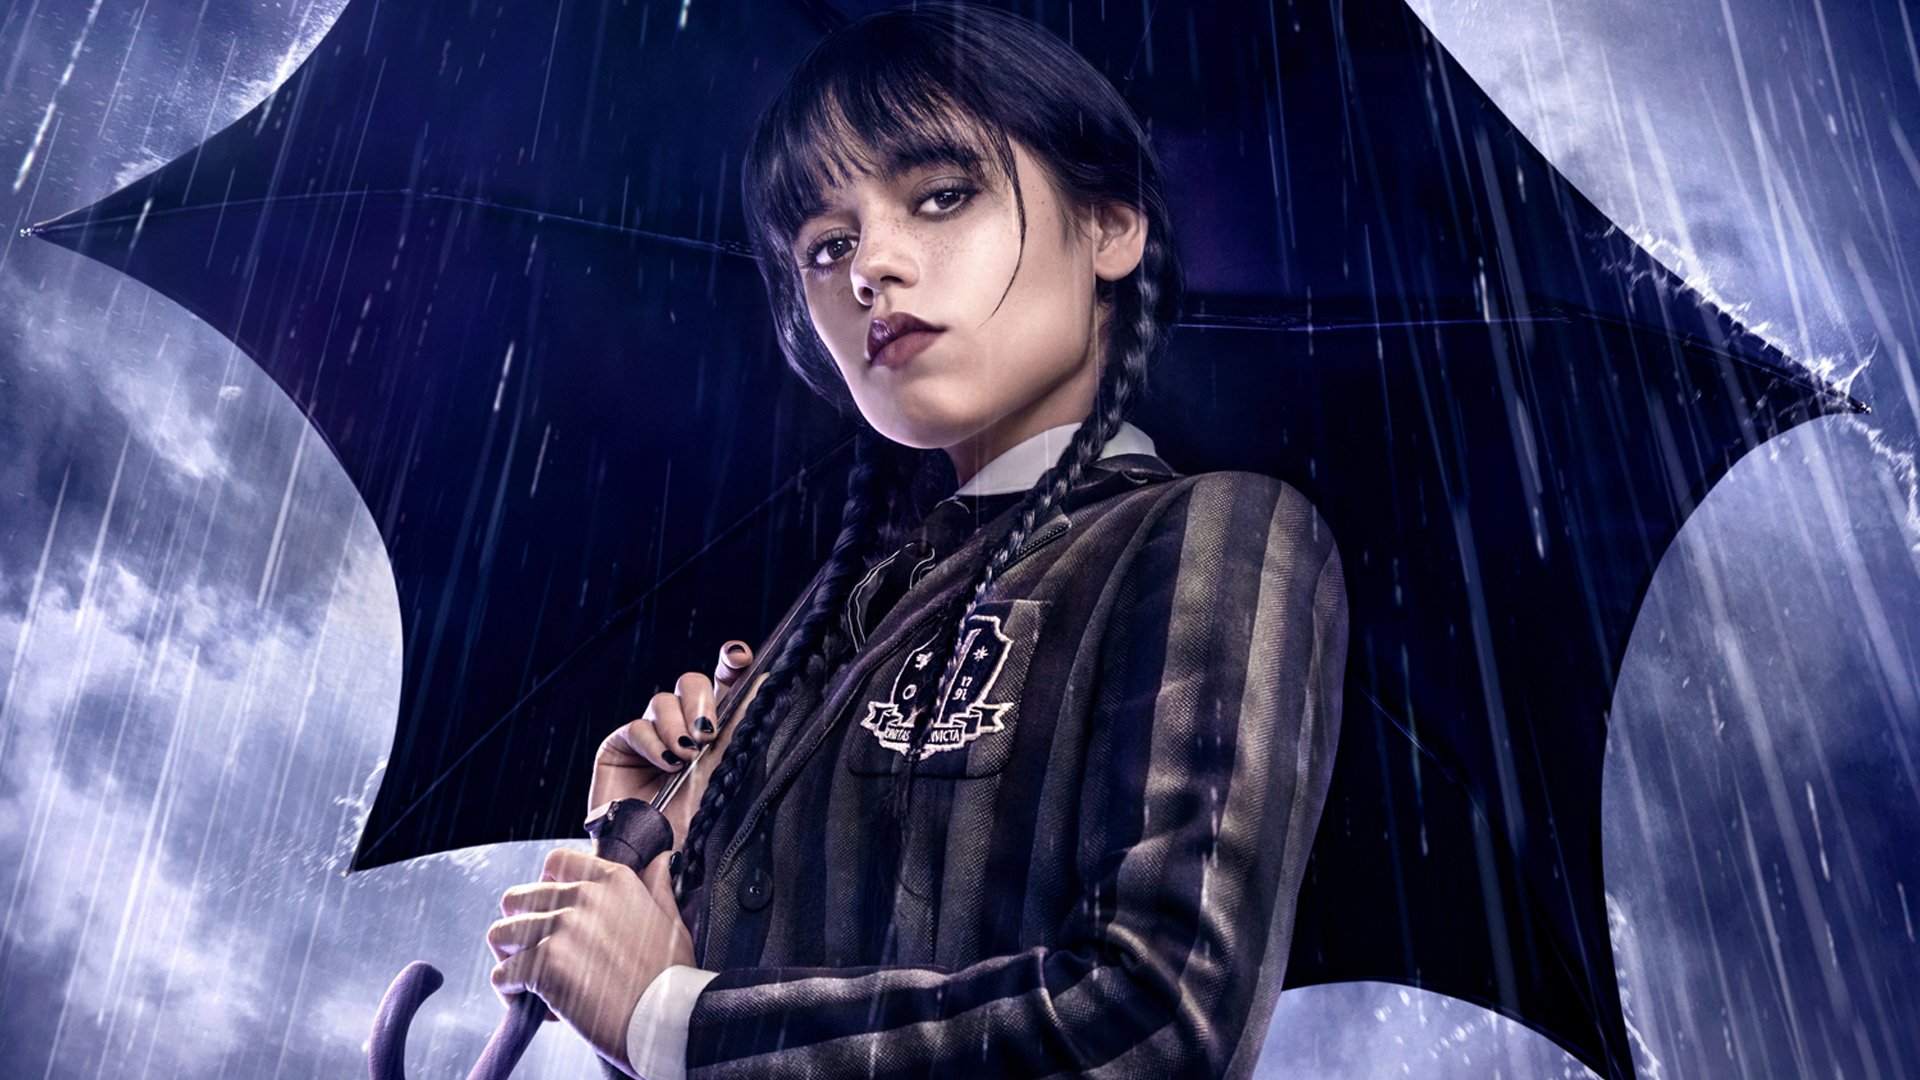 Wednesday Addams Series on Netflix: Release Date and Time, Cast, Plot